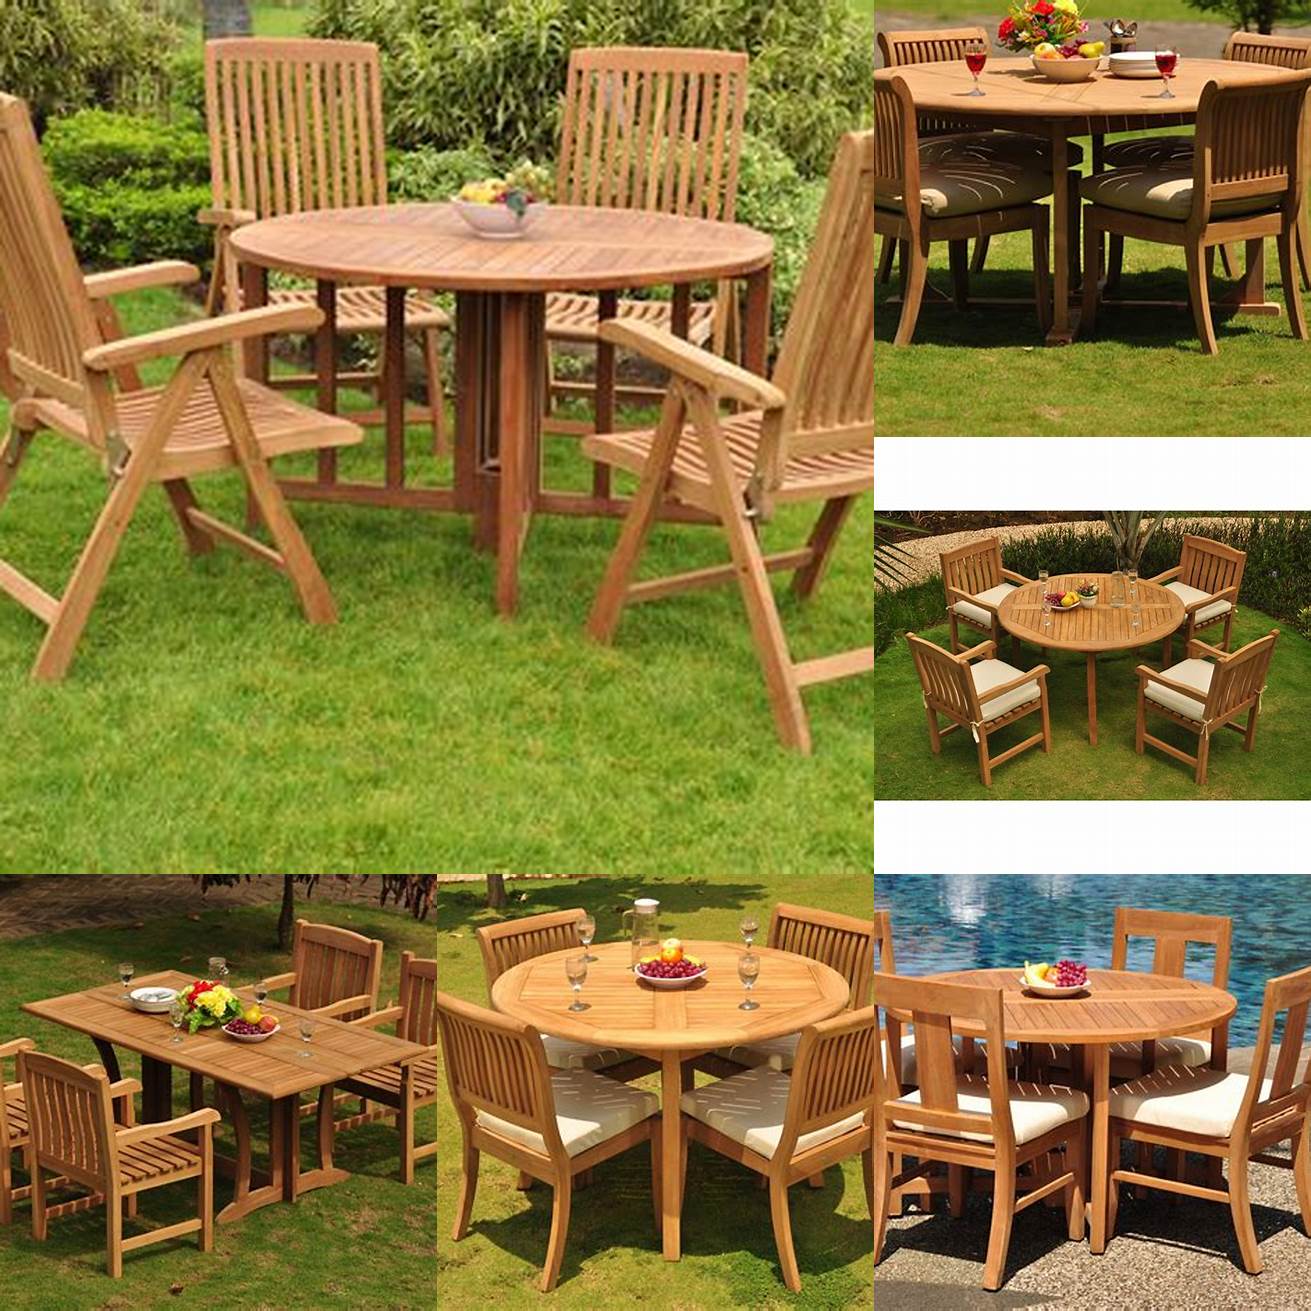 A teak outdoor table with four chairs